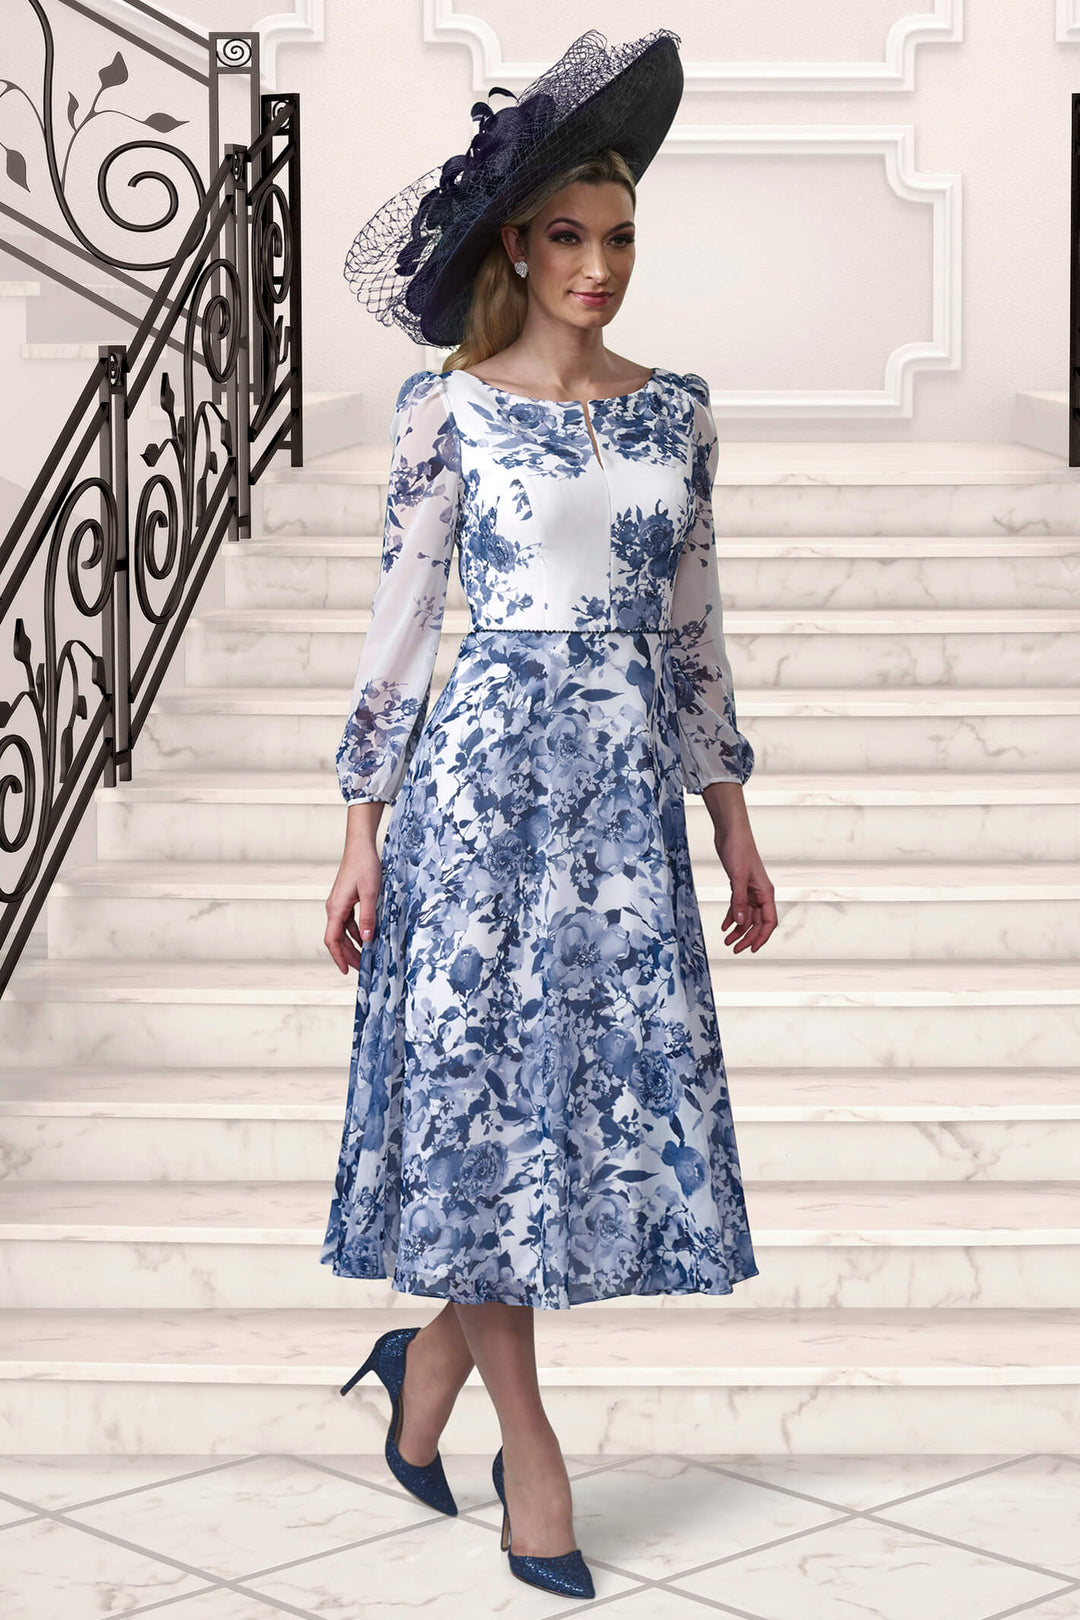 Veromia VO9676 Navy Ivory Floral Print Occasion Dress - Dotique